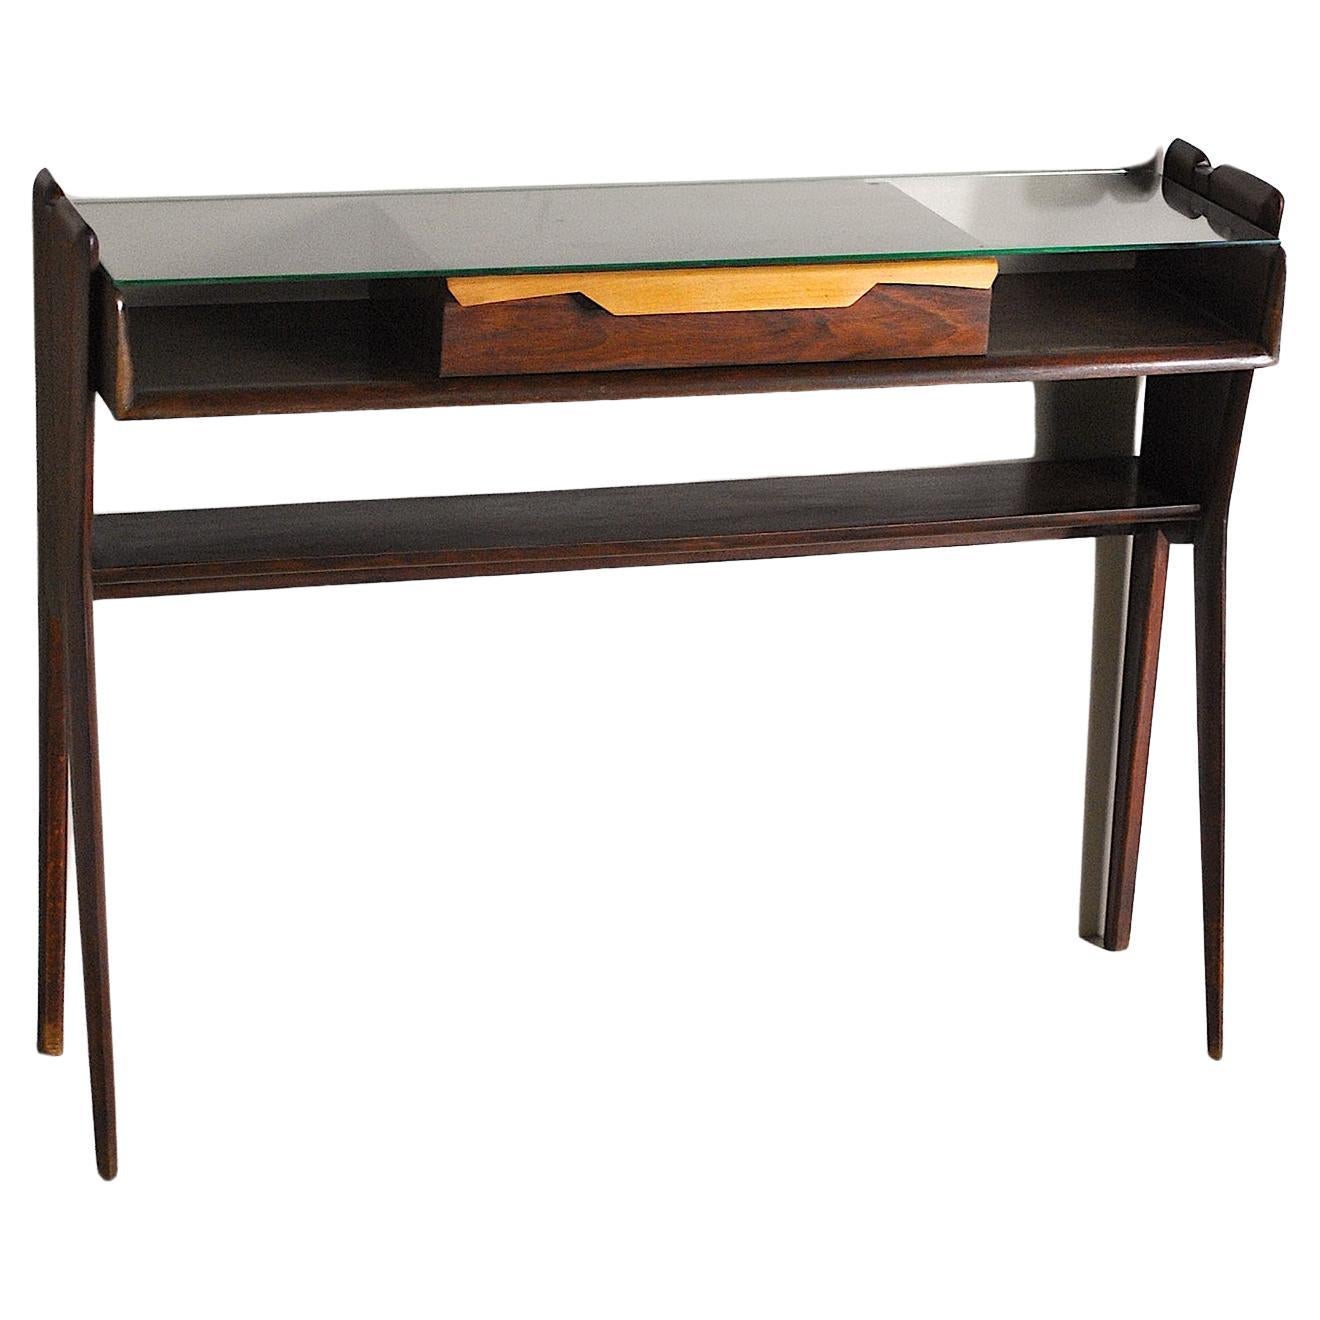 Italian Mid Century Console Table Late 50's Ico Parisi Style For Sale